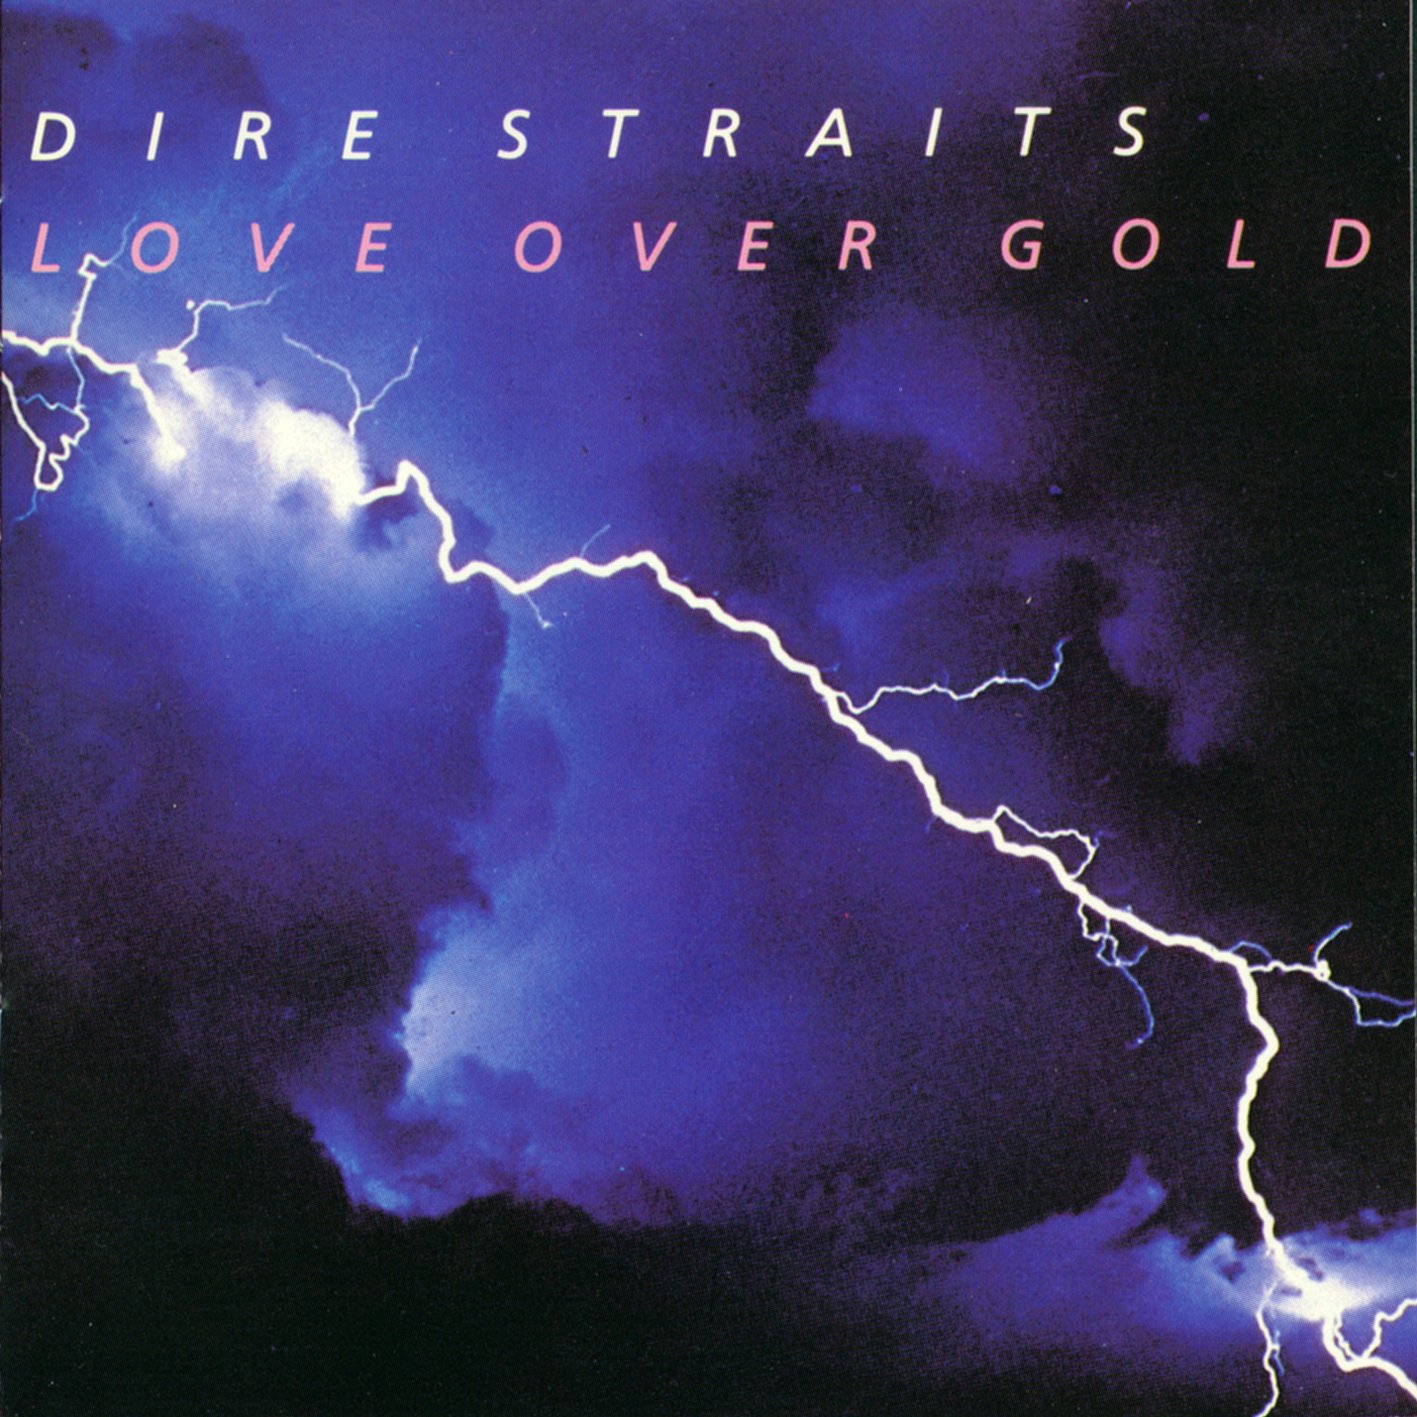 [Dire+Straits+-+Love+Over+Gold+-+Recto.jpg]